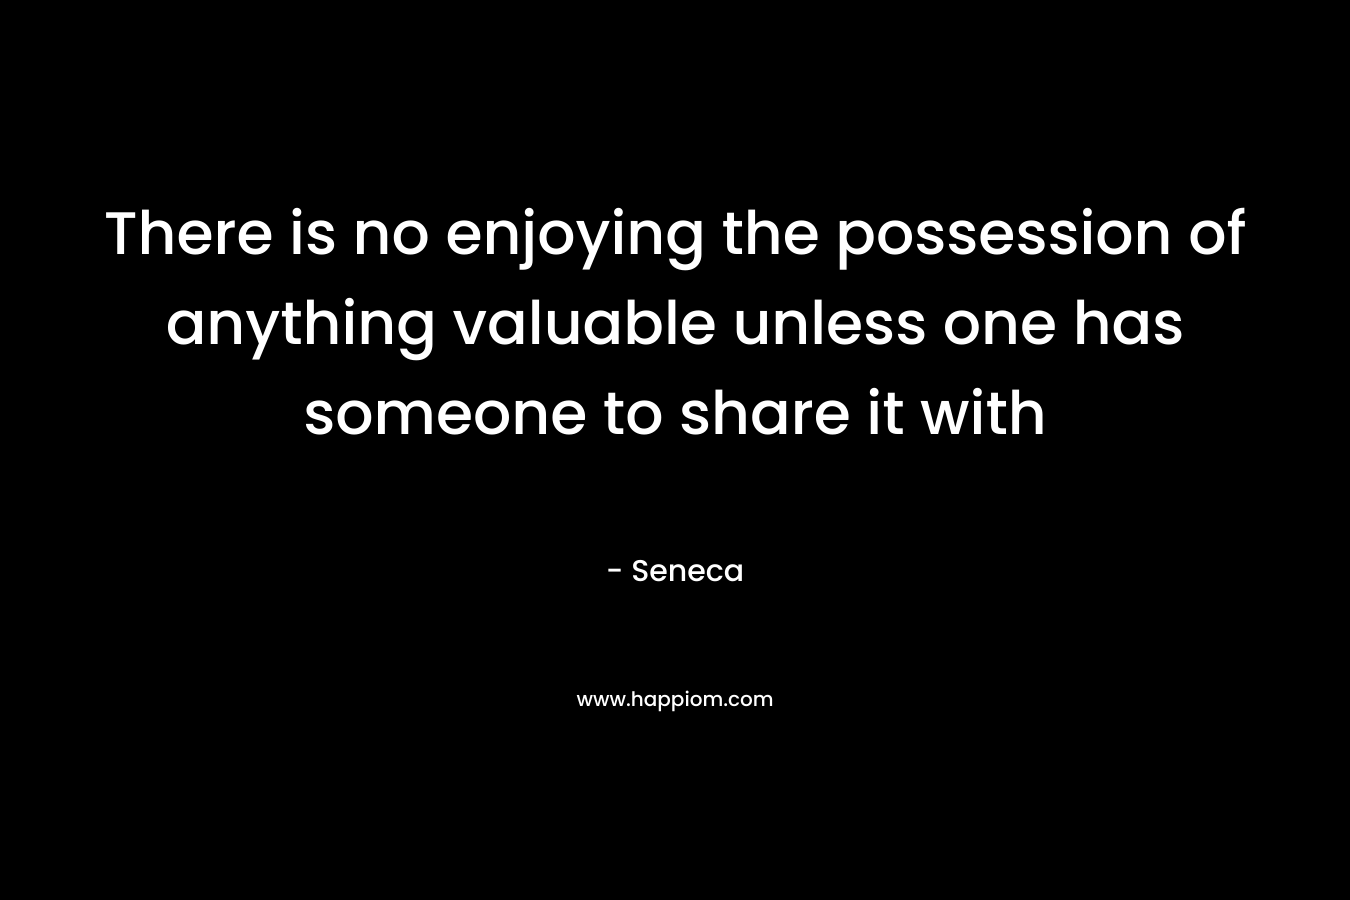 There is no enjoying the possession of anything valuable unless one has someone to share it with